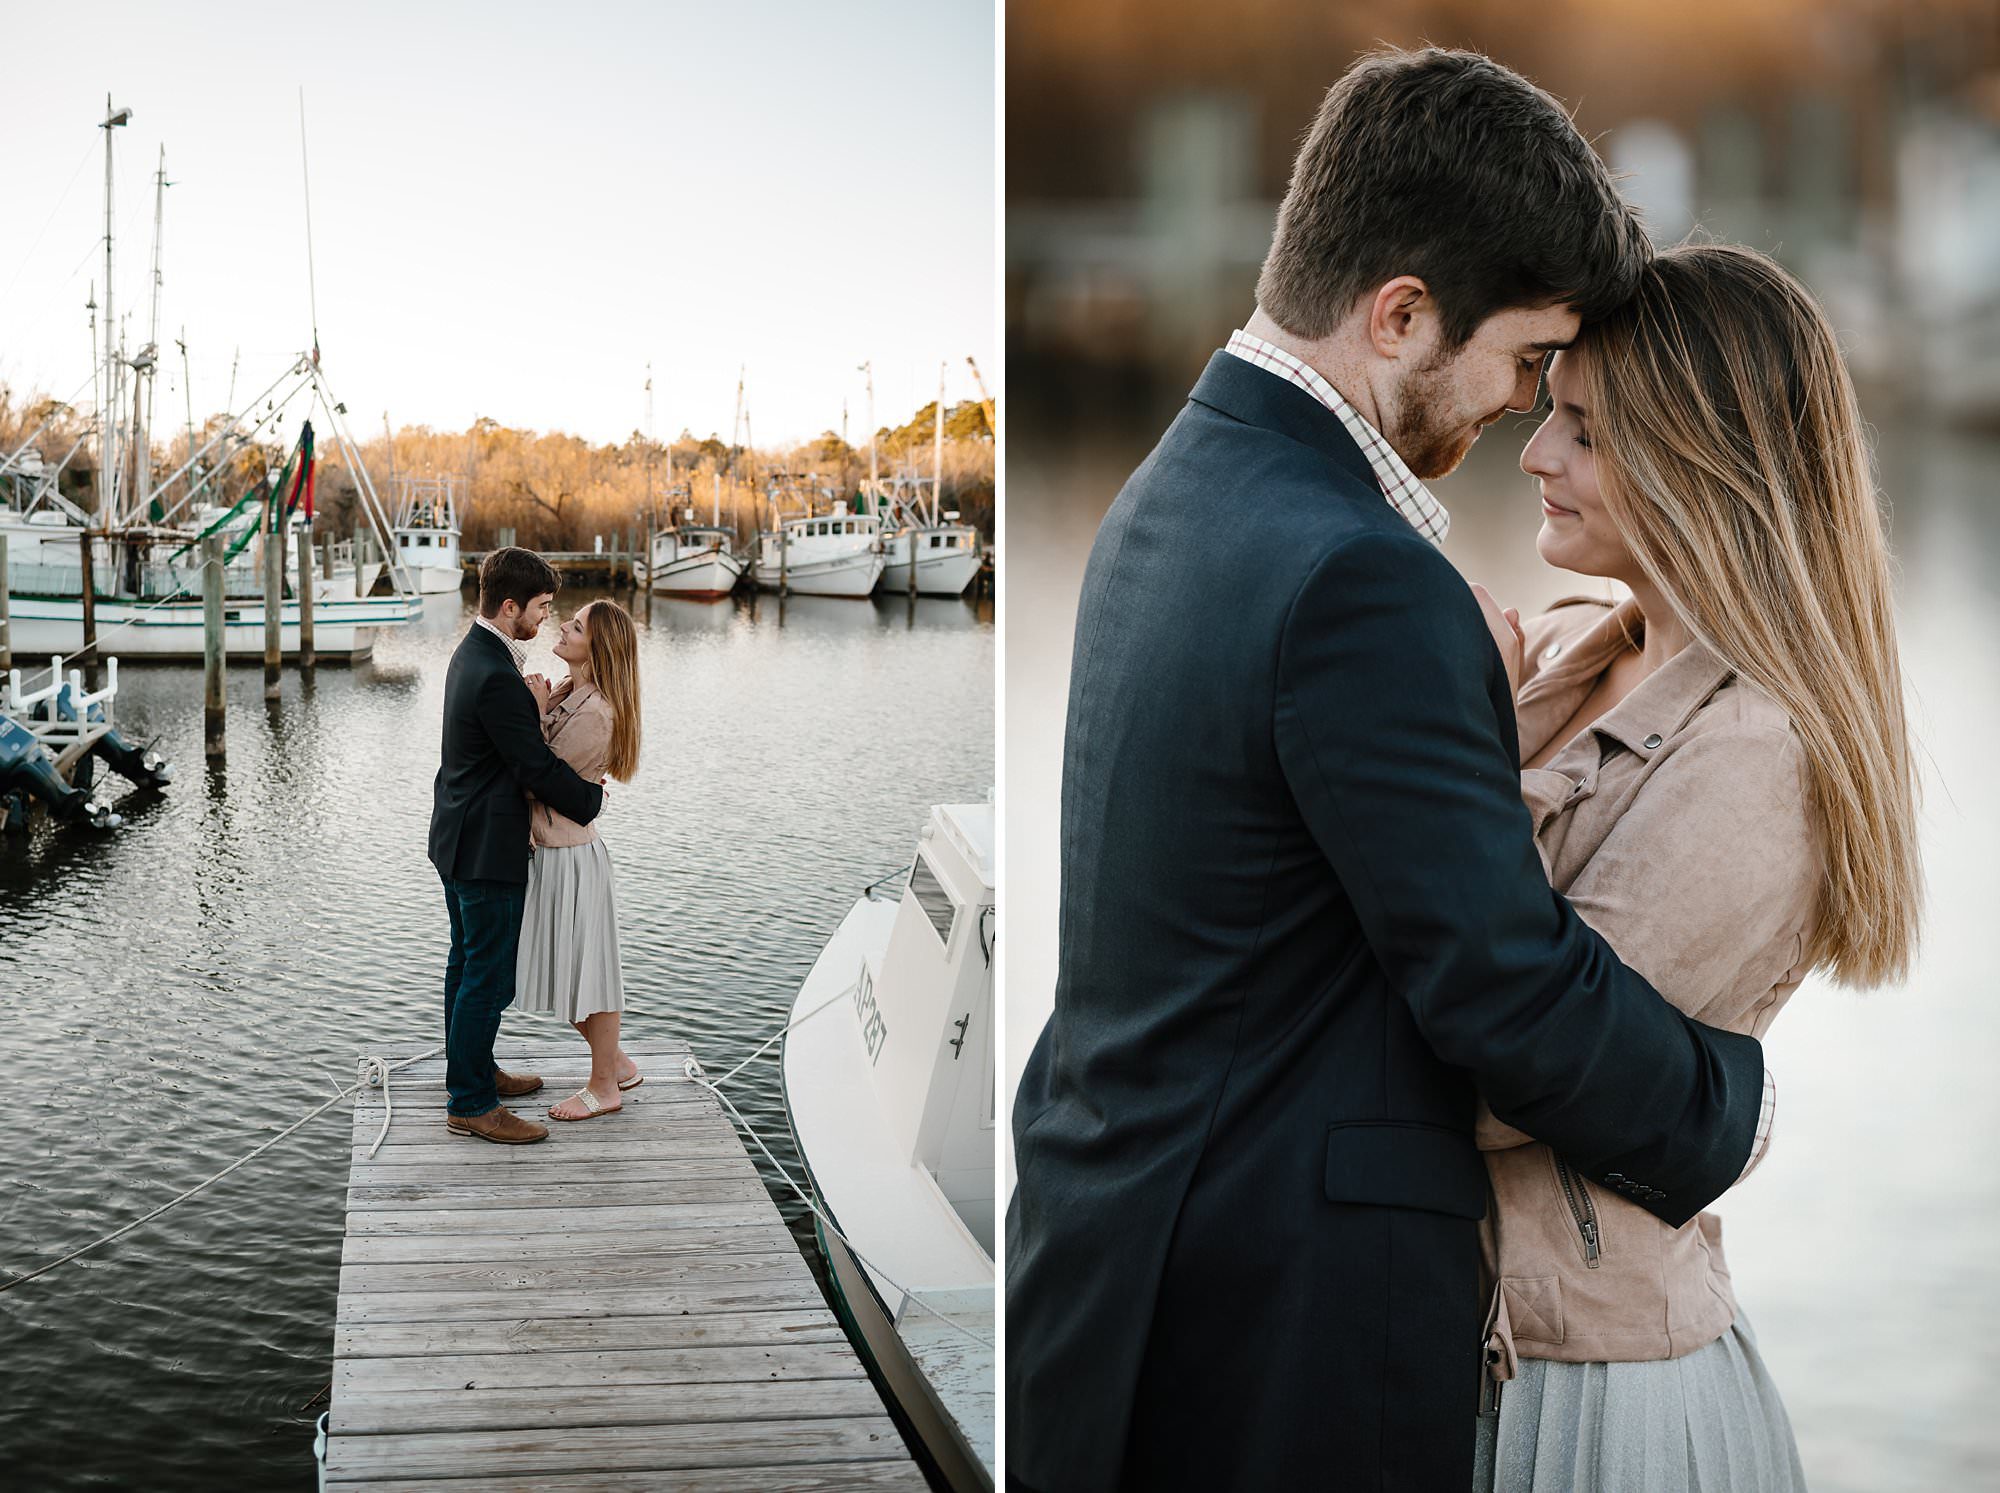 Megan and Turner embracing on a dock slip in the marina at the end of Market St Apalachicola 